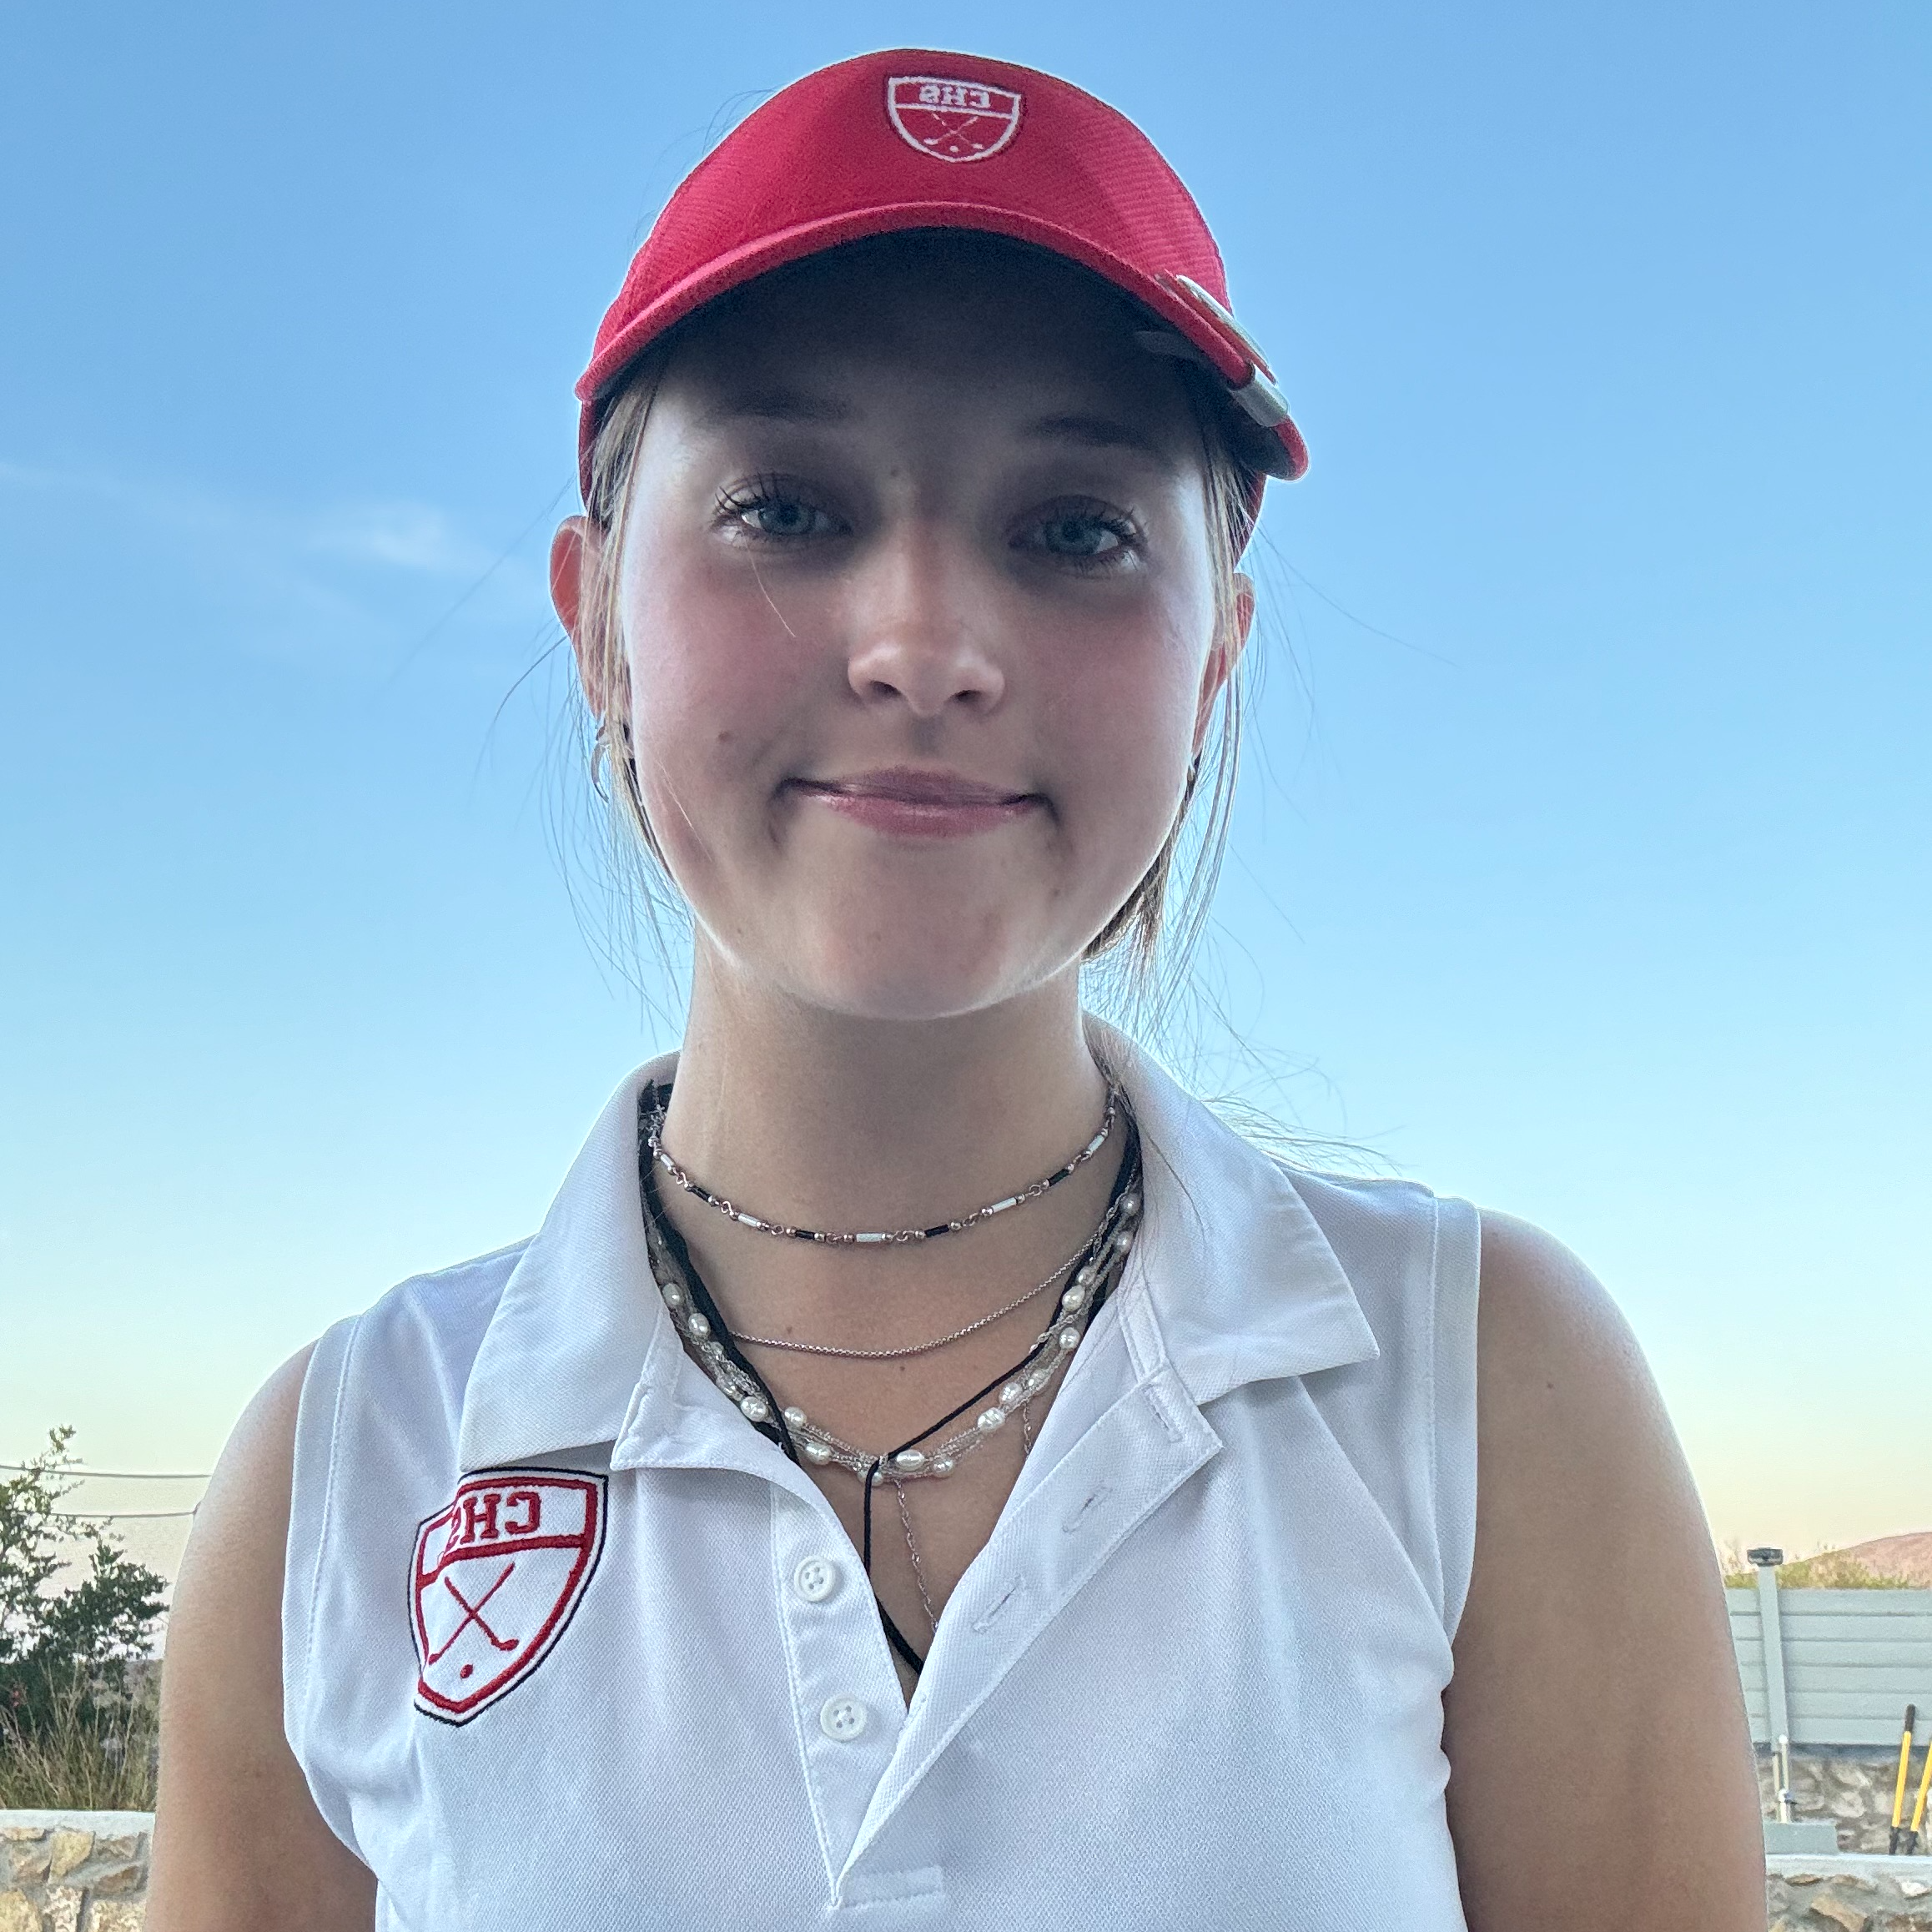 Hats off to Carly Moore, the LCPS student athlete of the week from Centennial High School. Carly is a sophomore and plays golf for the Hawks. As a teammate, she’s caring, thoughtful, creative, and enthusiastic. Off the course, Carly enjoys time with family and friends.  